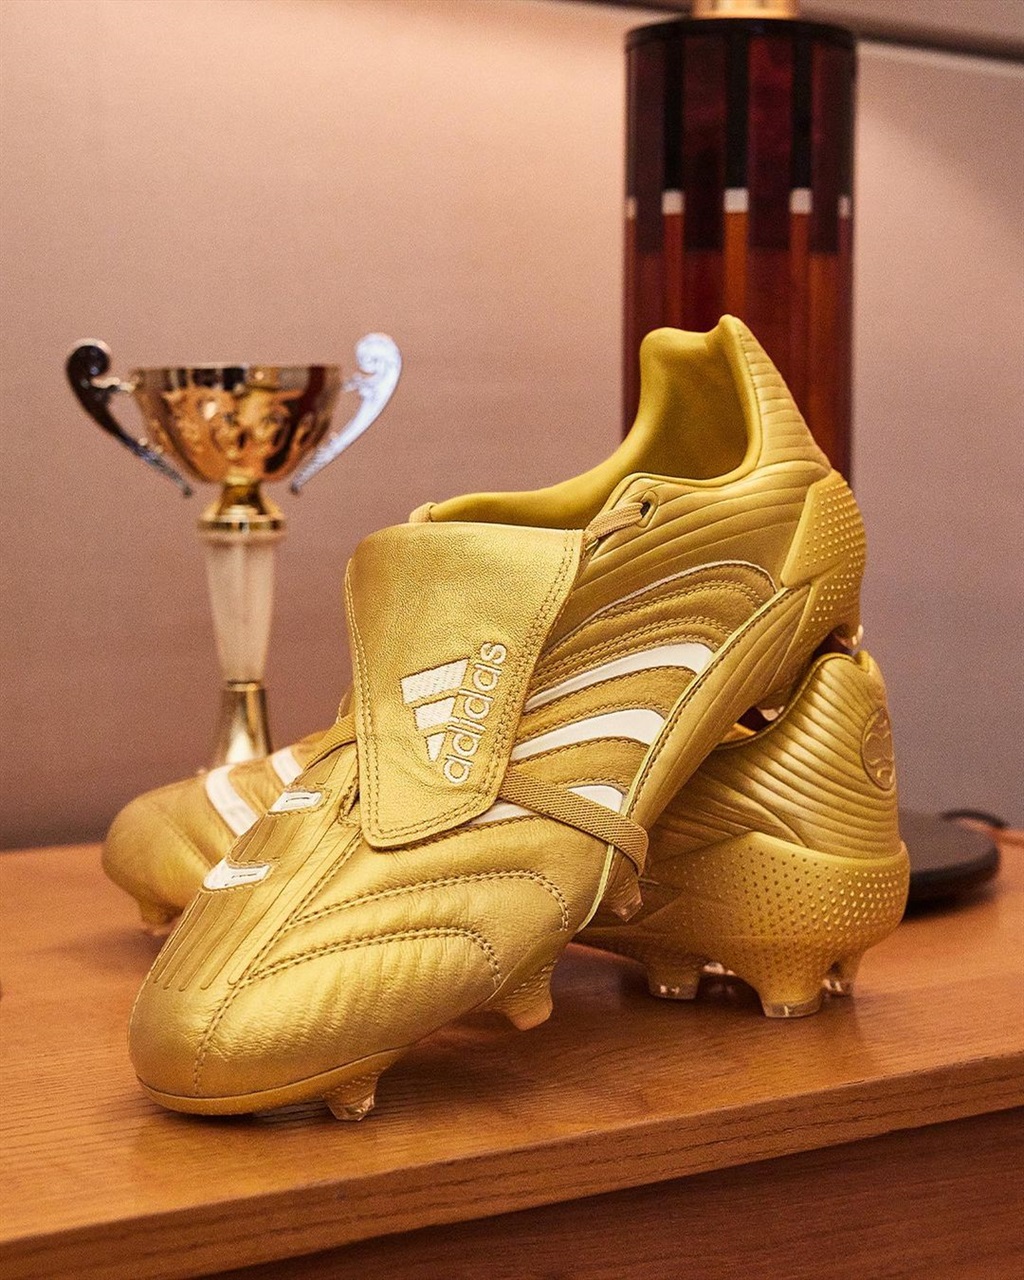 The gold Adidas Predator Absolute boots.